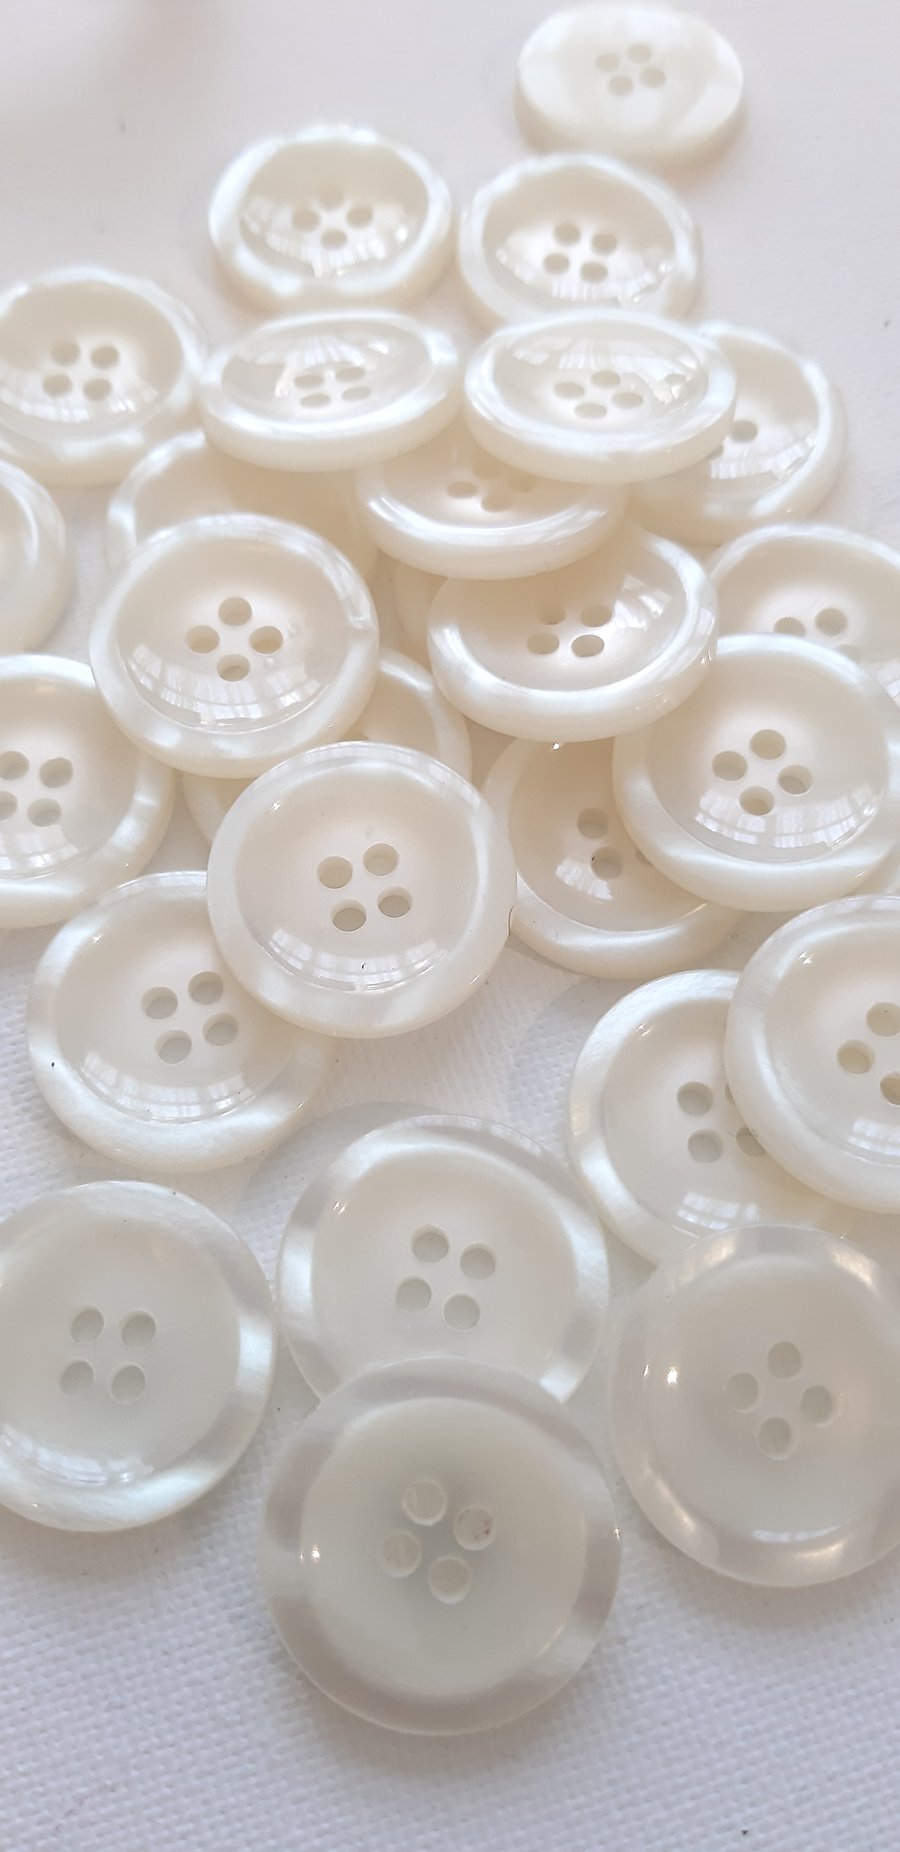 10 glossy cream off-white buttons 23mm 4-hole